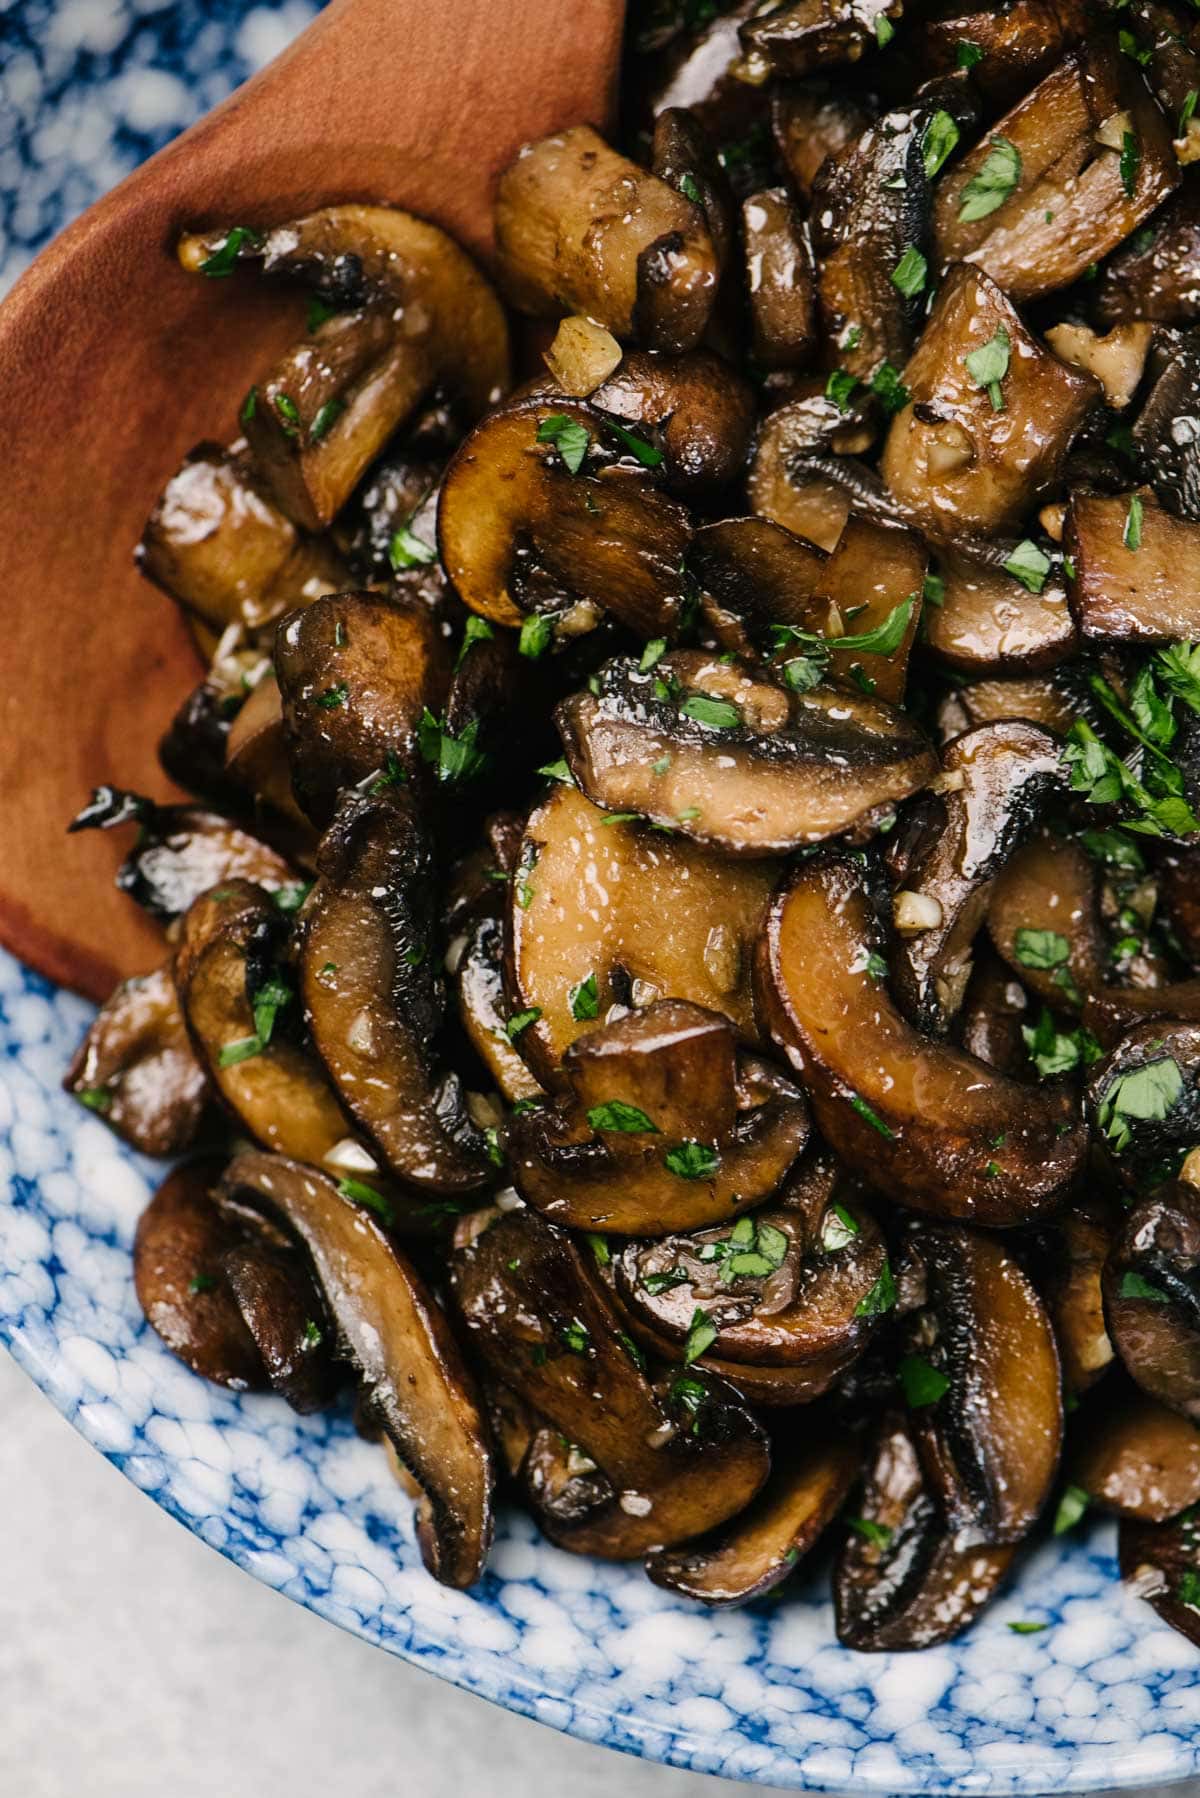 Detailed/close-up view of sauteed mushrooms in a blue speckled serving bowl with a wood spoon; the mushrooms are garnished with fresh chopped parsley.